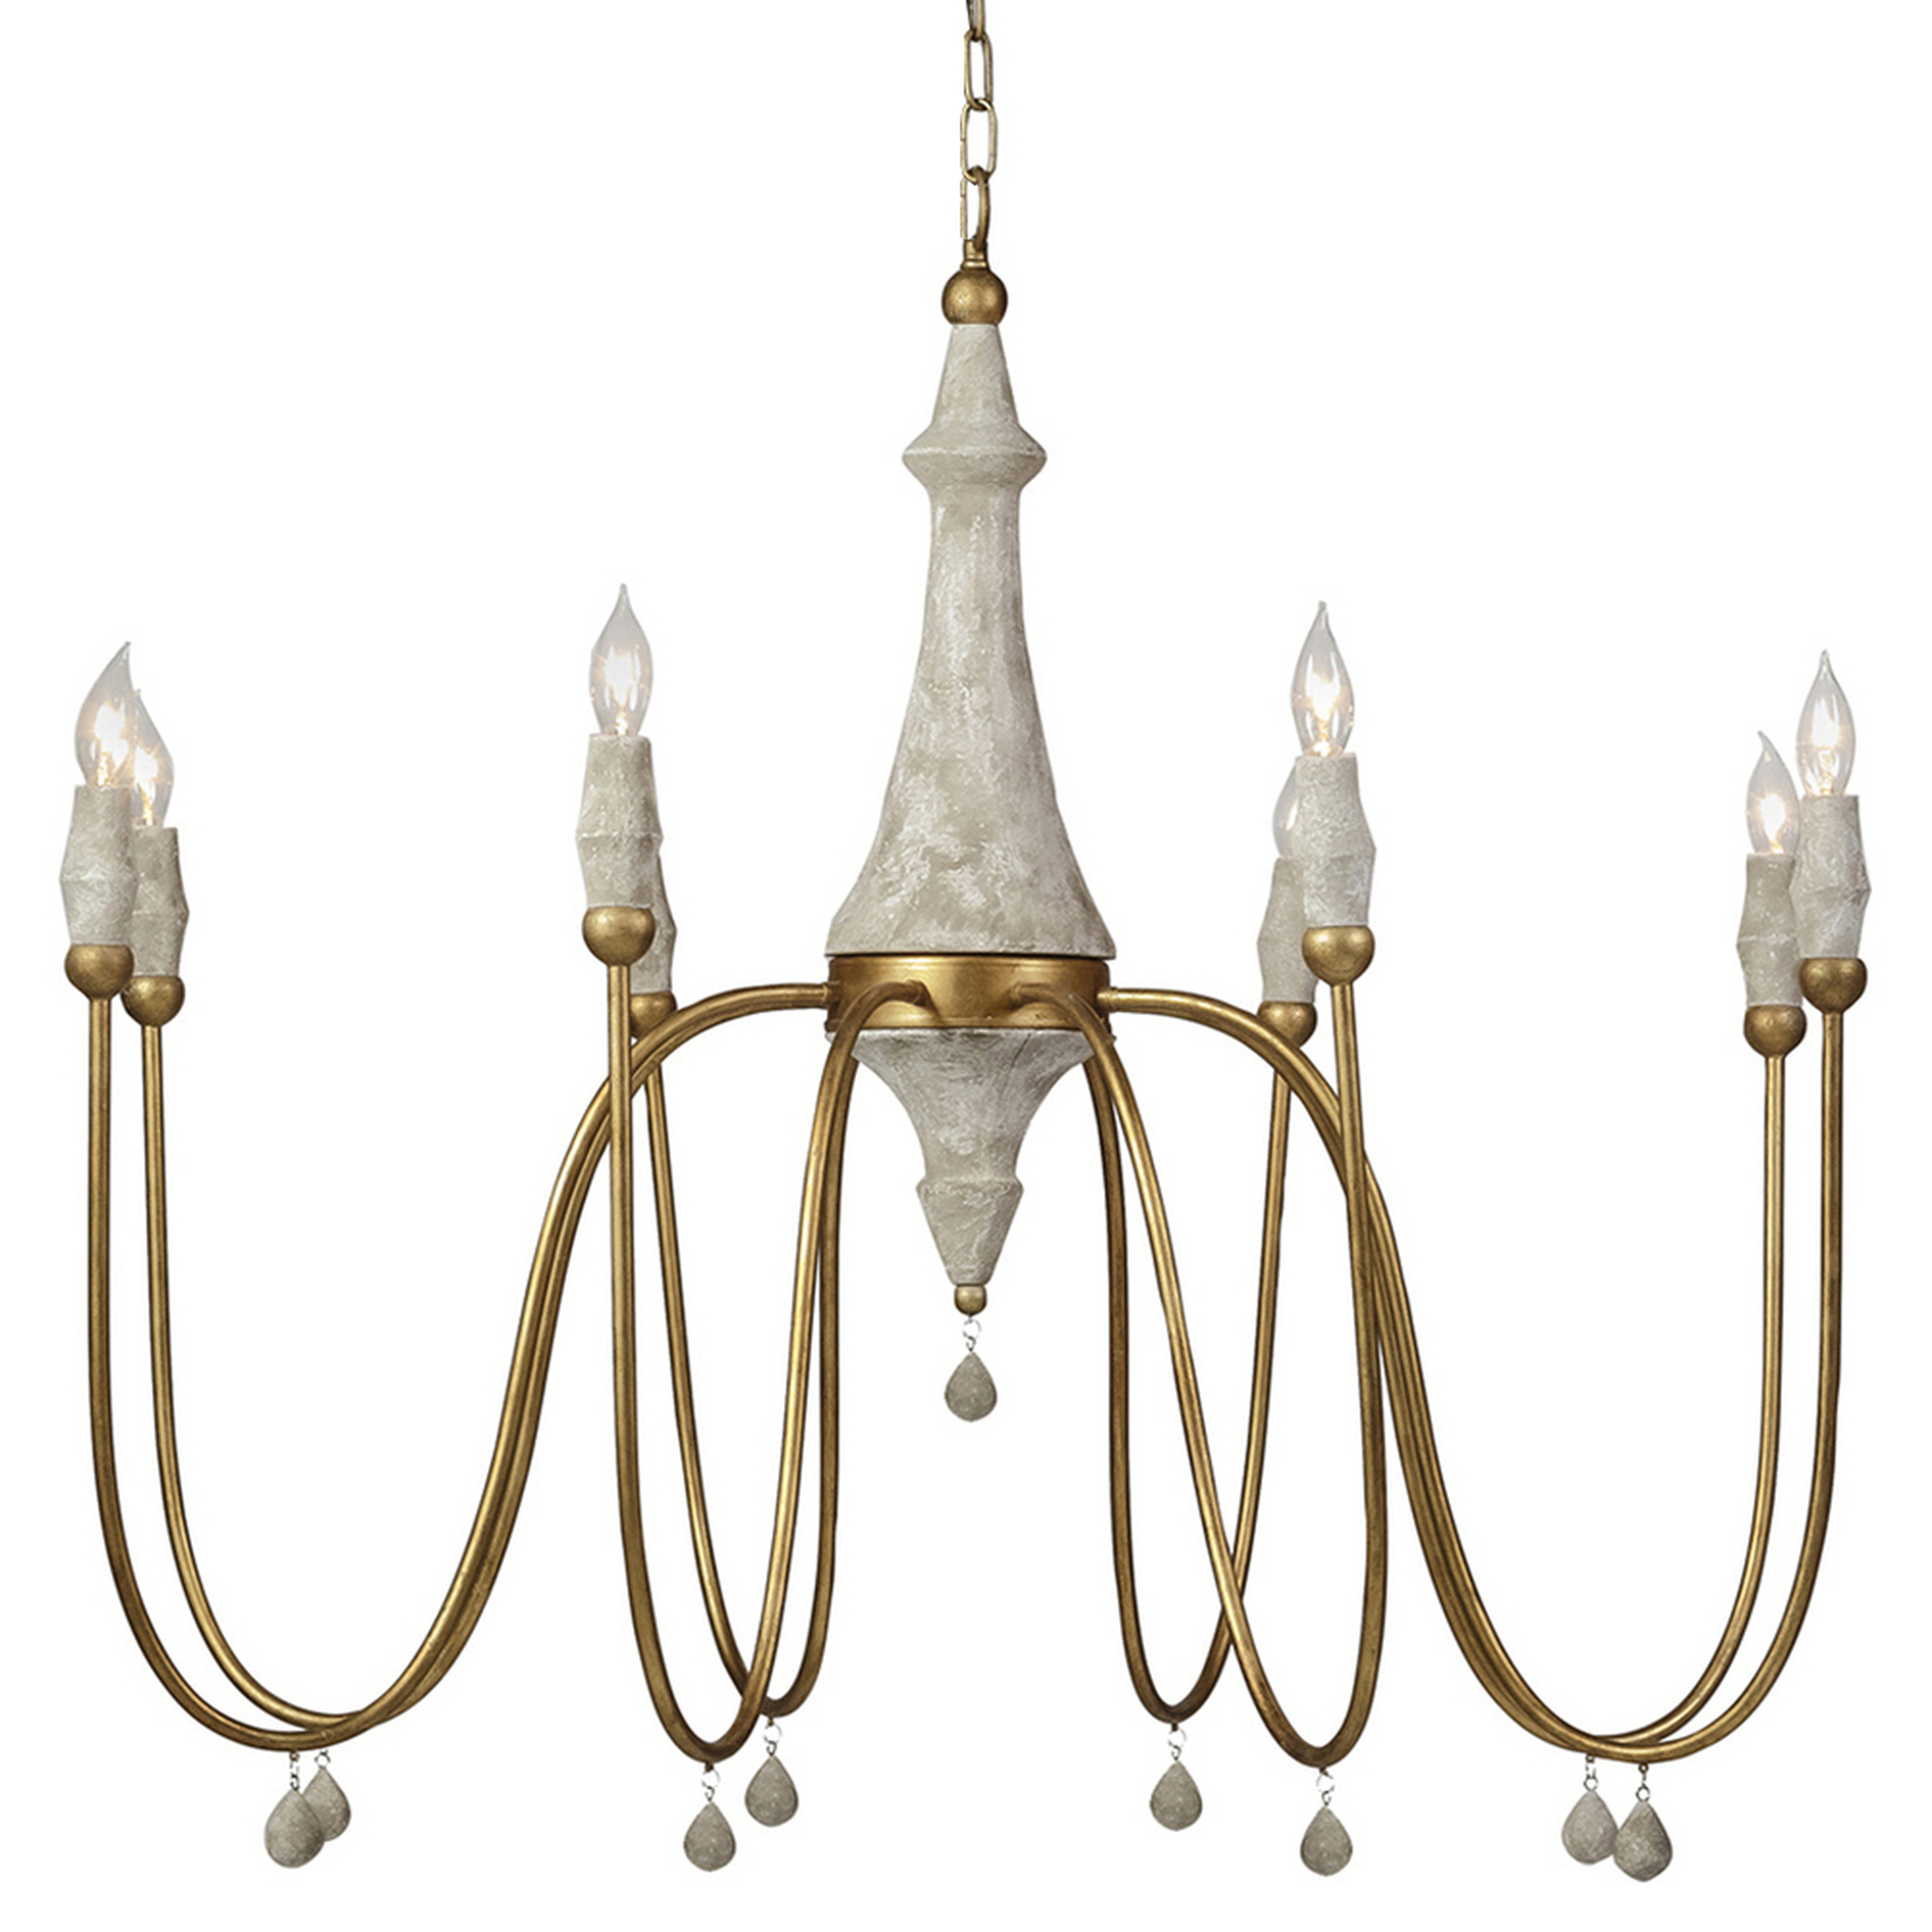 Dominique Vintage Gold Column Chandelier - Kathy Kuo Home